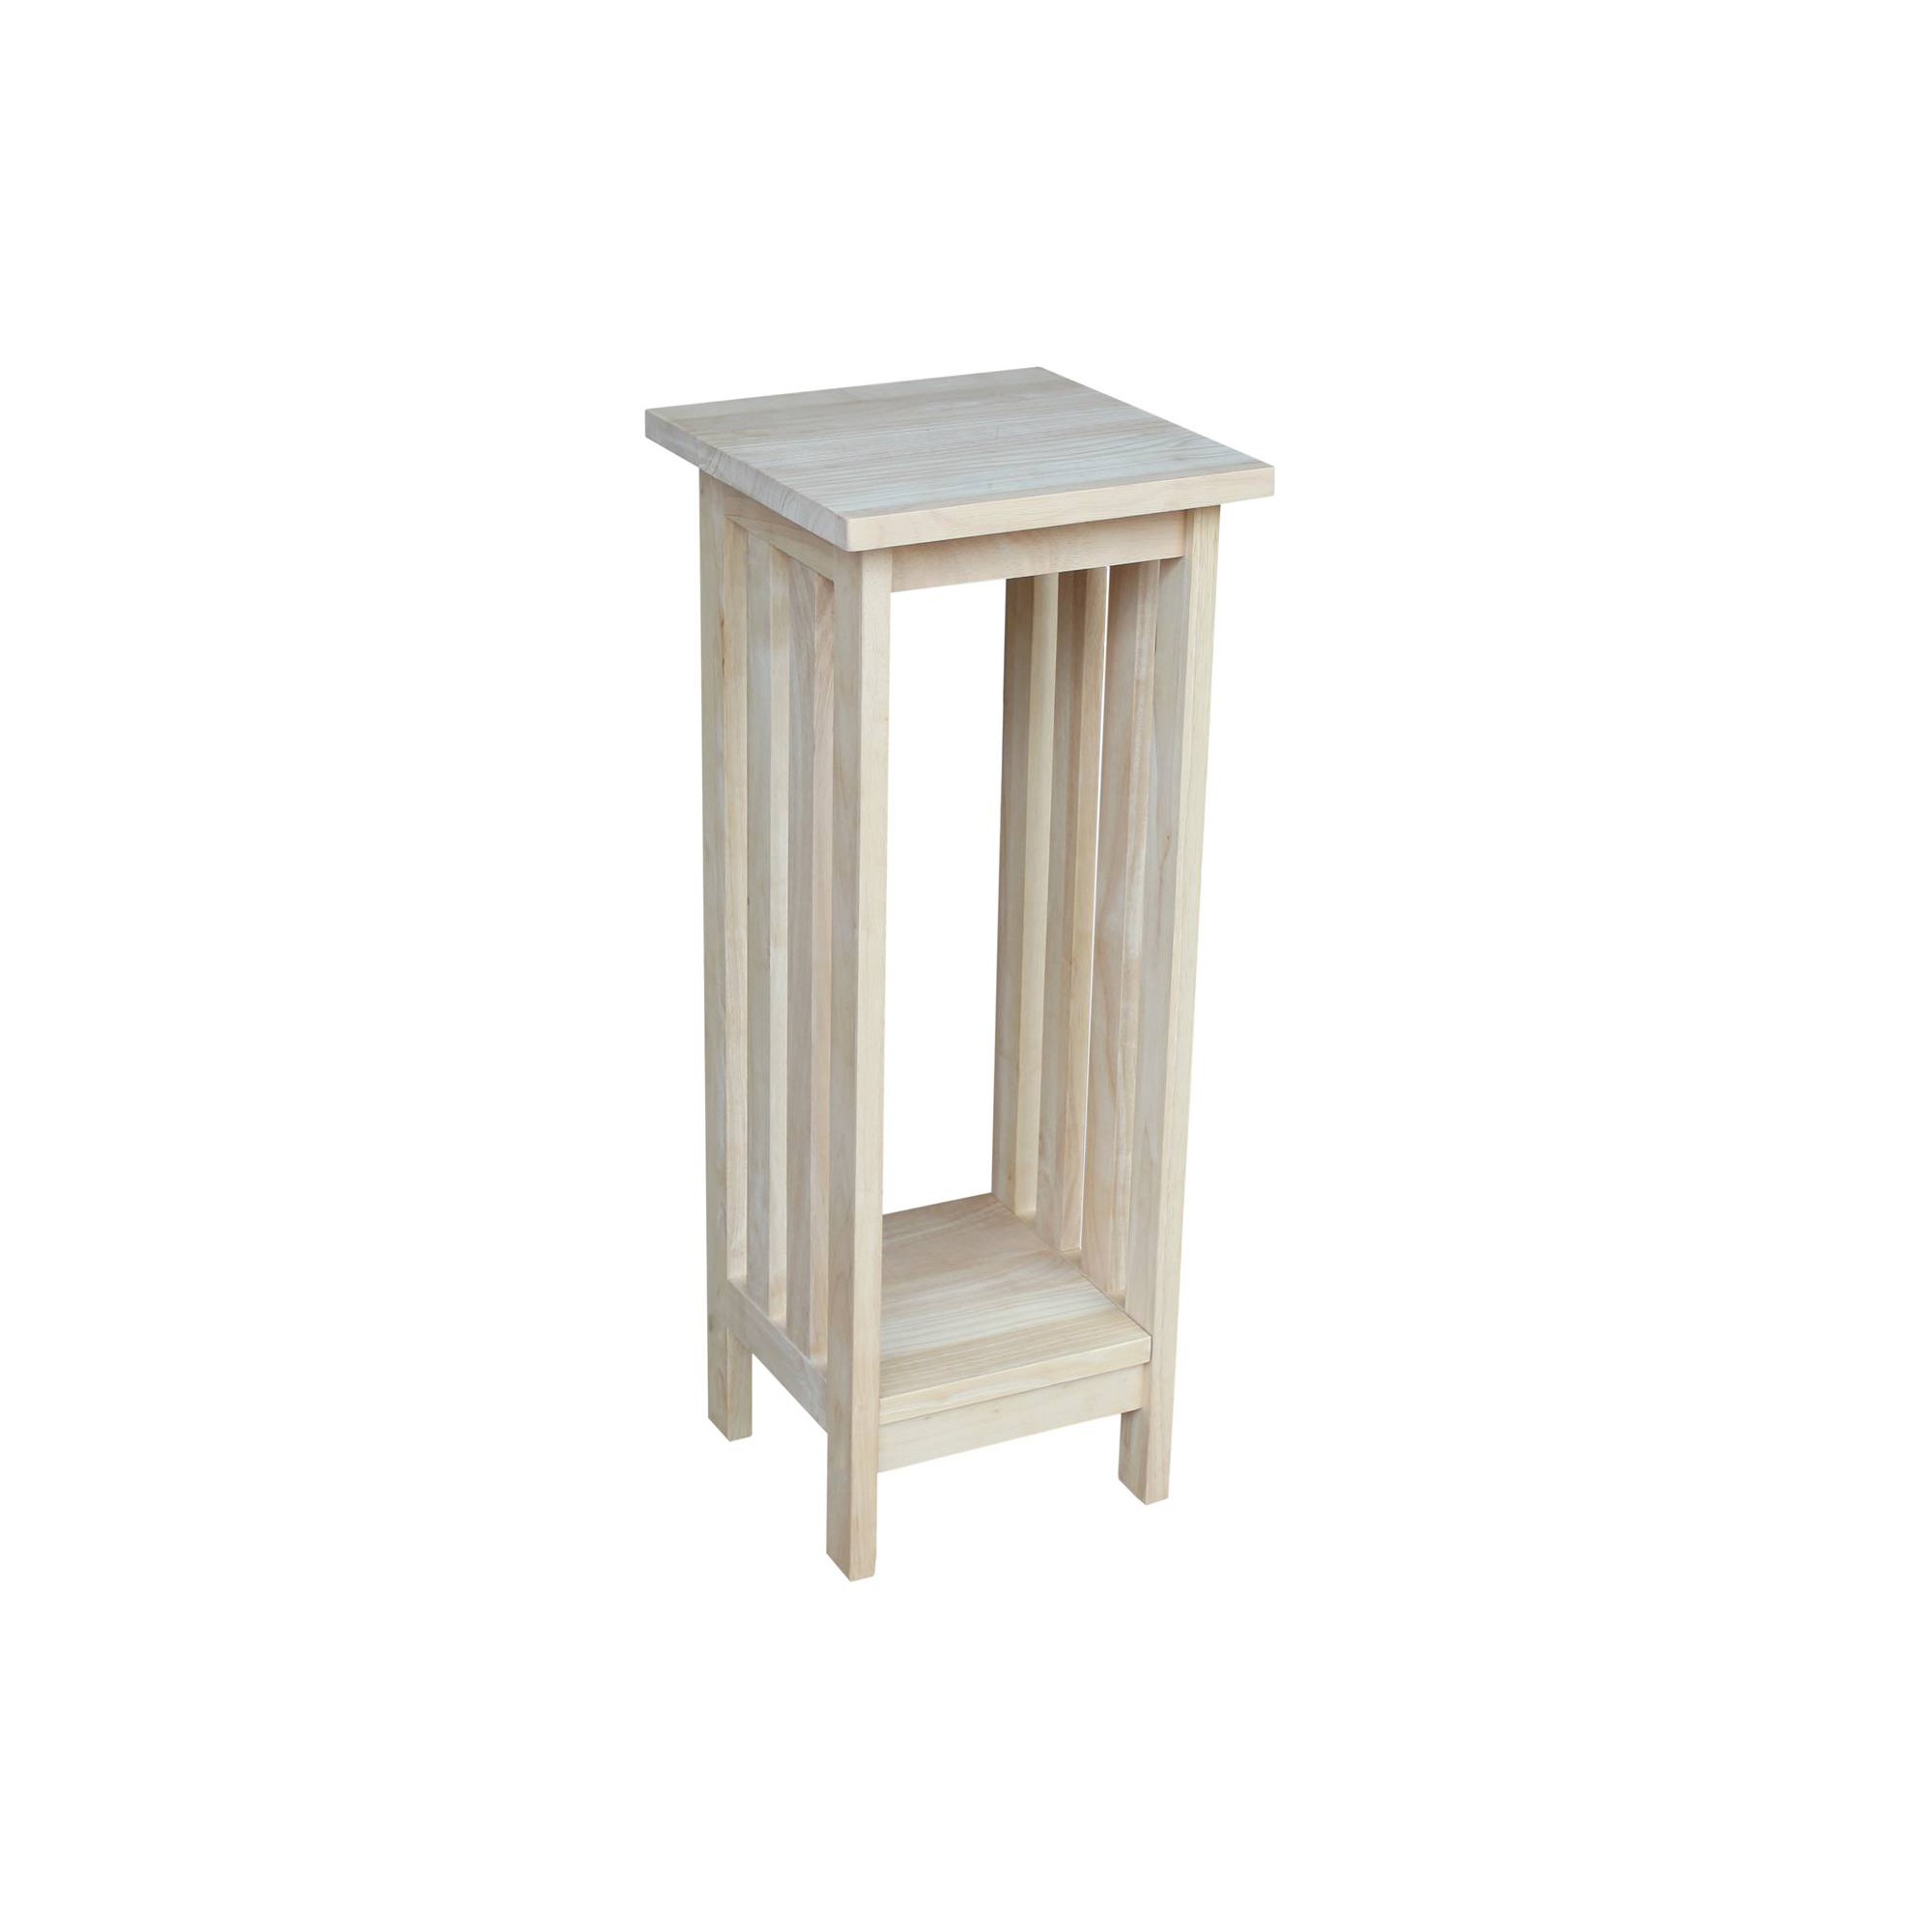 'Mission Plant Stand Unfinished 30'' - International Concepts, Brown'